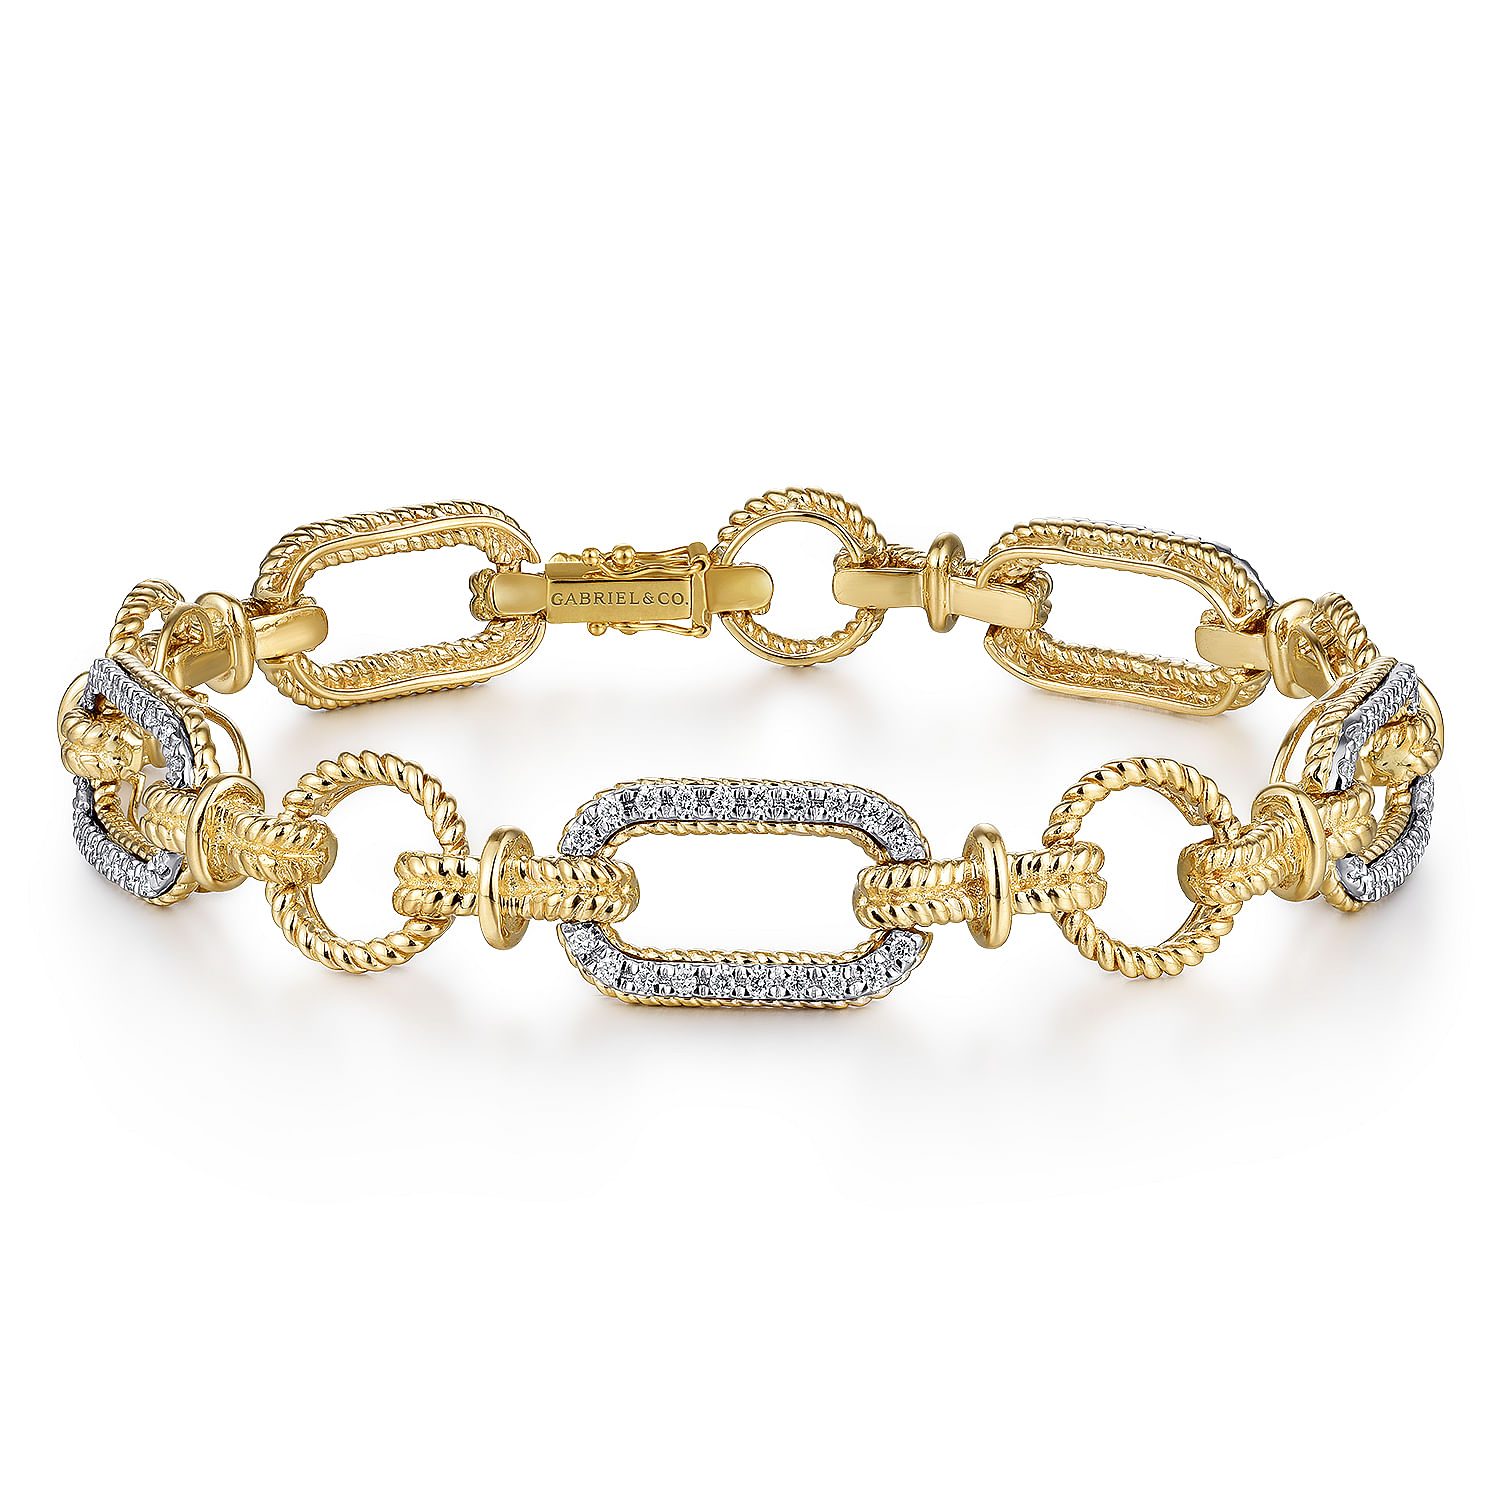 14K Yellow and White Gold Diamond Bracelet with Alternating Links